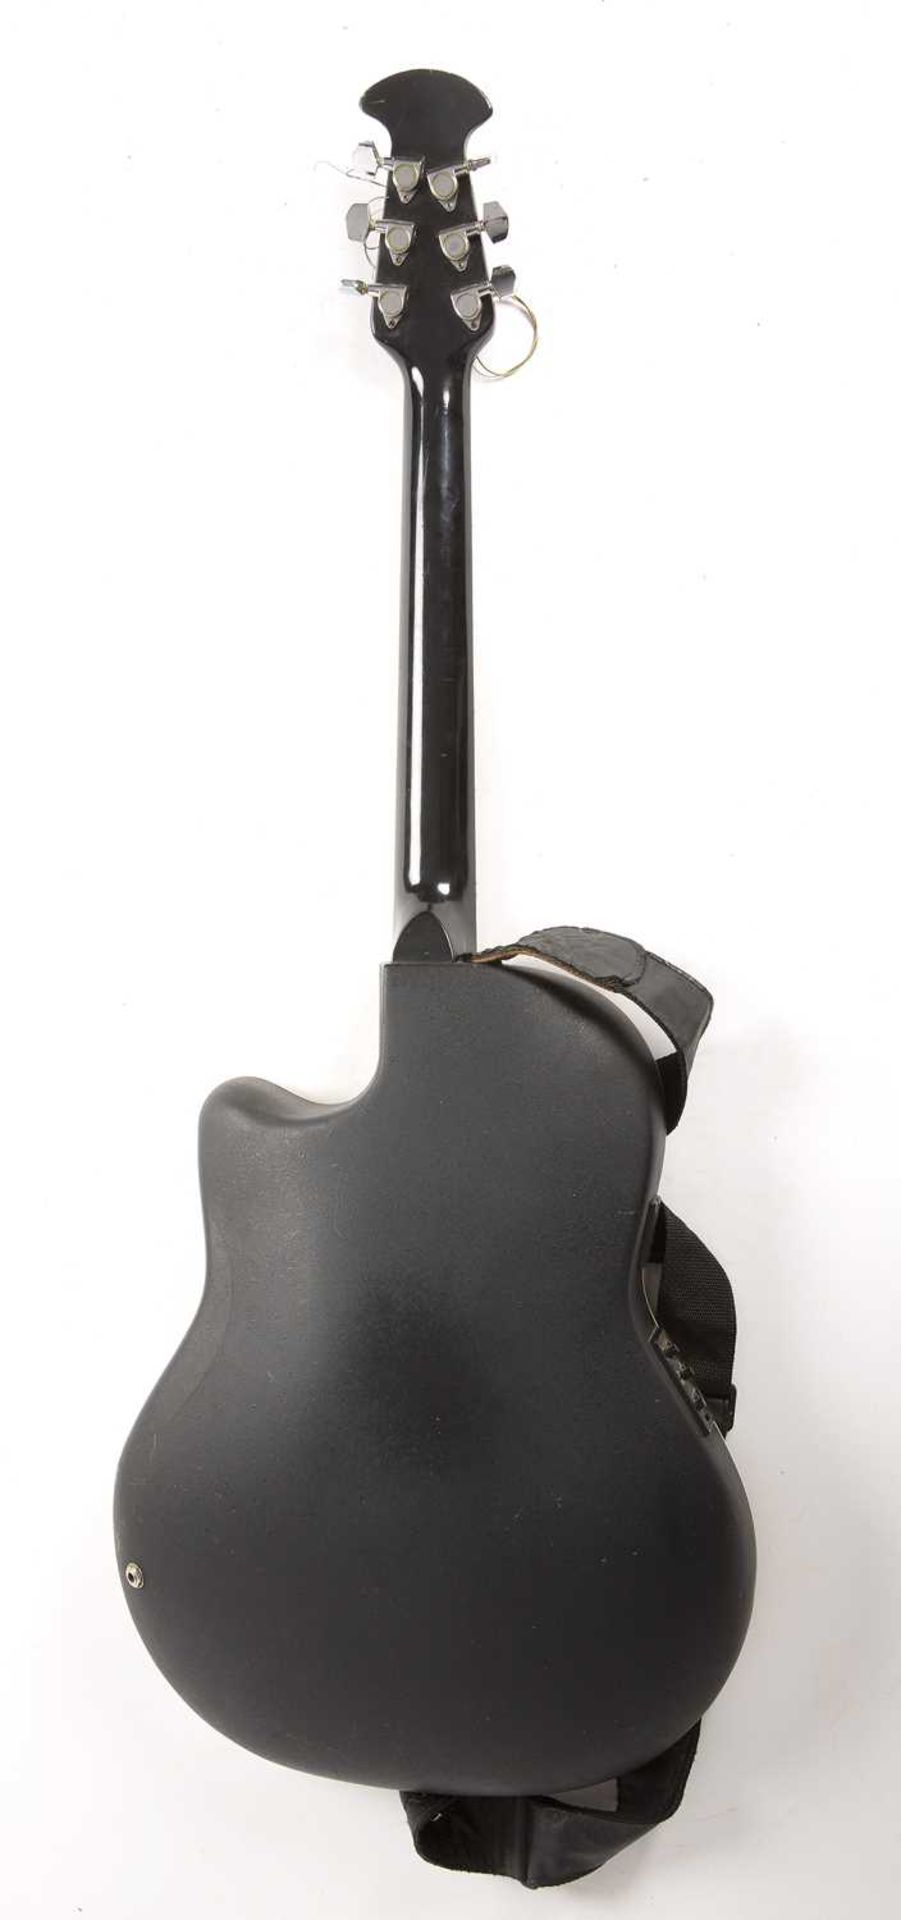 An Ovation 'Applause' electric Acoustic Guitar, model AE 128 with rounded back, 105.5cm overall - Image 2 of 2